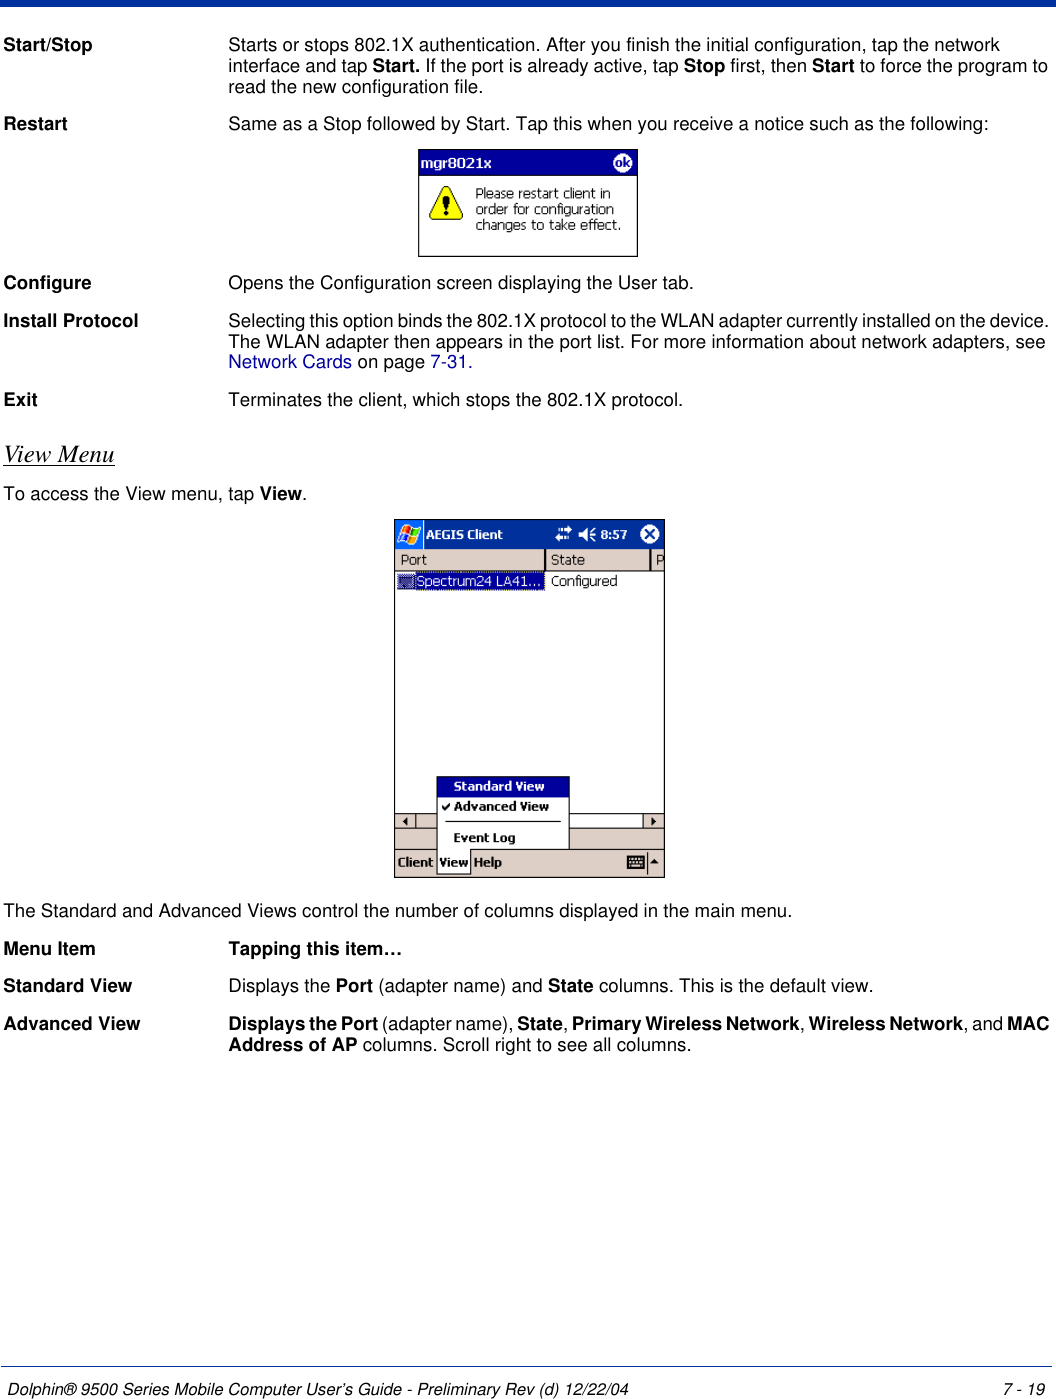 Dolphin® 9500 Series Mobile Computer User’s Guide - Preliminary Rev (d) 12/22/04 7 - 19Start/Stop  Starts or stops 802.1X authentication. After you finish the initial configuration, tap the network interface and tap Start. If the port is already active, tap Stop first, then Start to force the program to read the new configuration file. Restart Same as a Stop followed by Start. Tap this when you receive a notice such as the following:Configure Opens the Configuration screen displaying the User tab. Install Protocol  Selecting this option binds the 802.1X protocol to the WLAN adapter currently installed on the device. The WLAN adapter then appears in the port list. For more information about network adapters, see Network Cards on page 7-31.Exit  Terminates the client, which stops the 802.1X protocol.View MenuTo access the View menu, tap View.The Standard and Advanced Views control the number of columns displayed in the main menu. Menu Item Tapping this item…Standard View Displays the Port (adapter name) and State columns. This is the default view.Advanced View Displays the Port (adapter name), State, Primary Wireless Network, Wireless Network, and MAC Address of AP columns. Scroll right to see all columns.